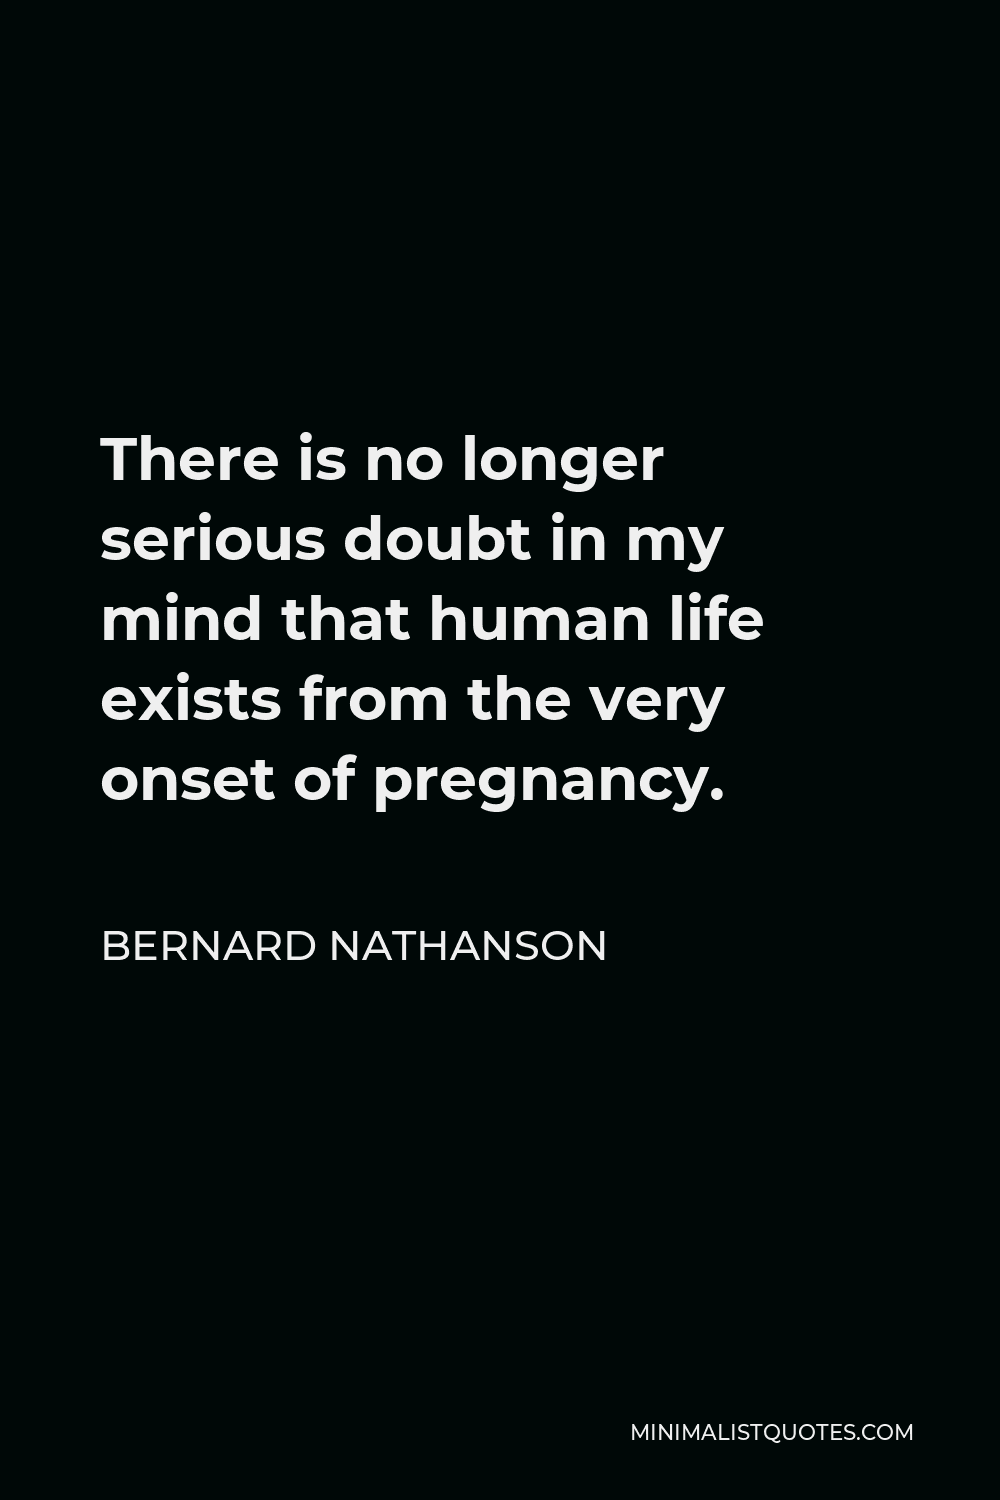 Bernard Nathanson Quote - There is no longer serious doubt in my mind that human life exists from the very onset of pregnancy.